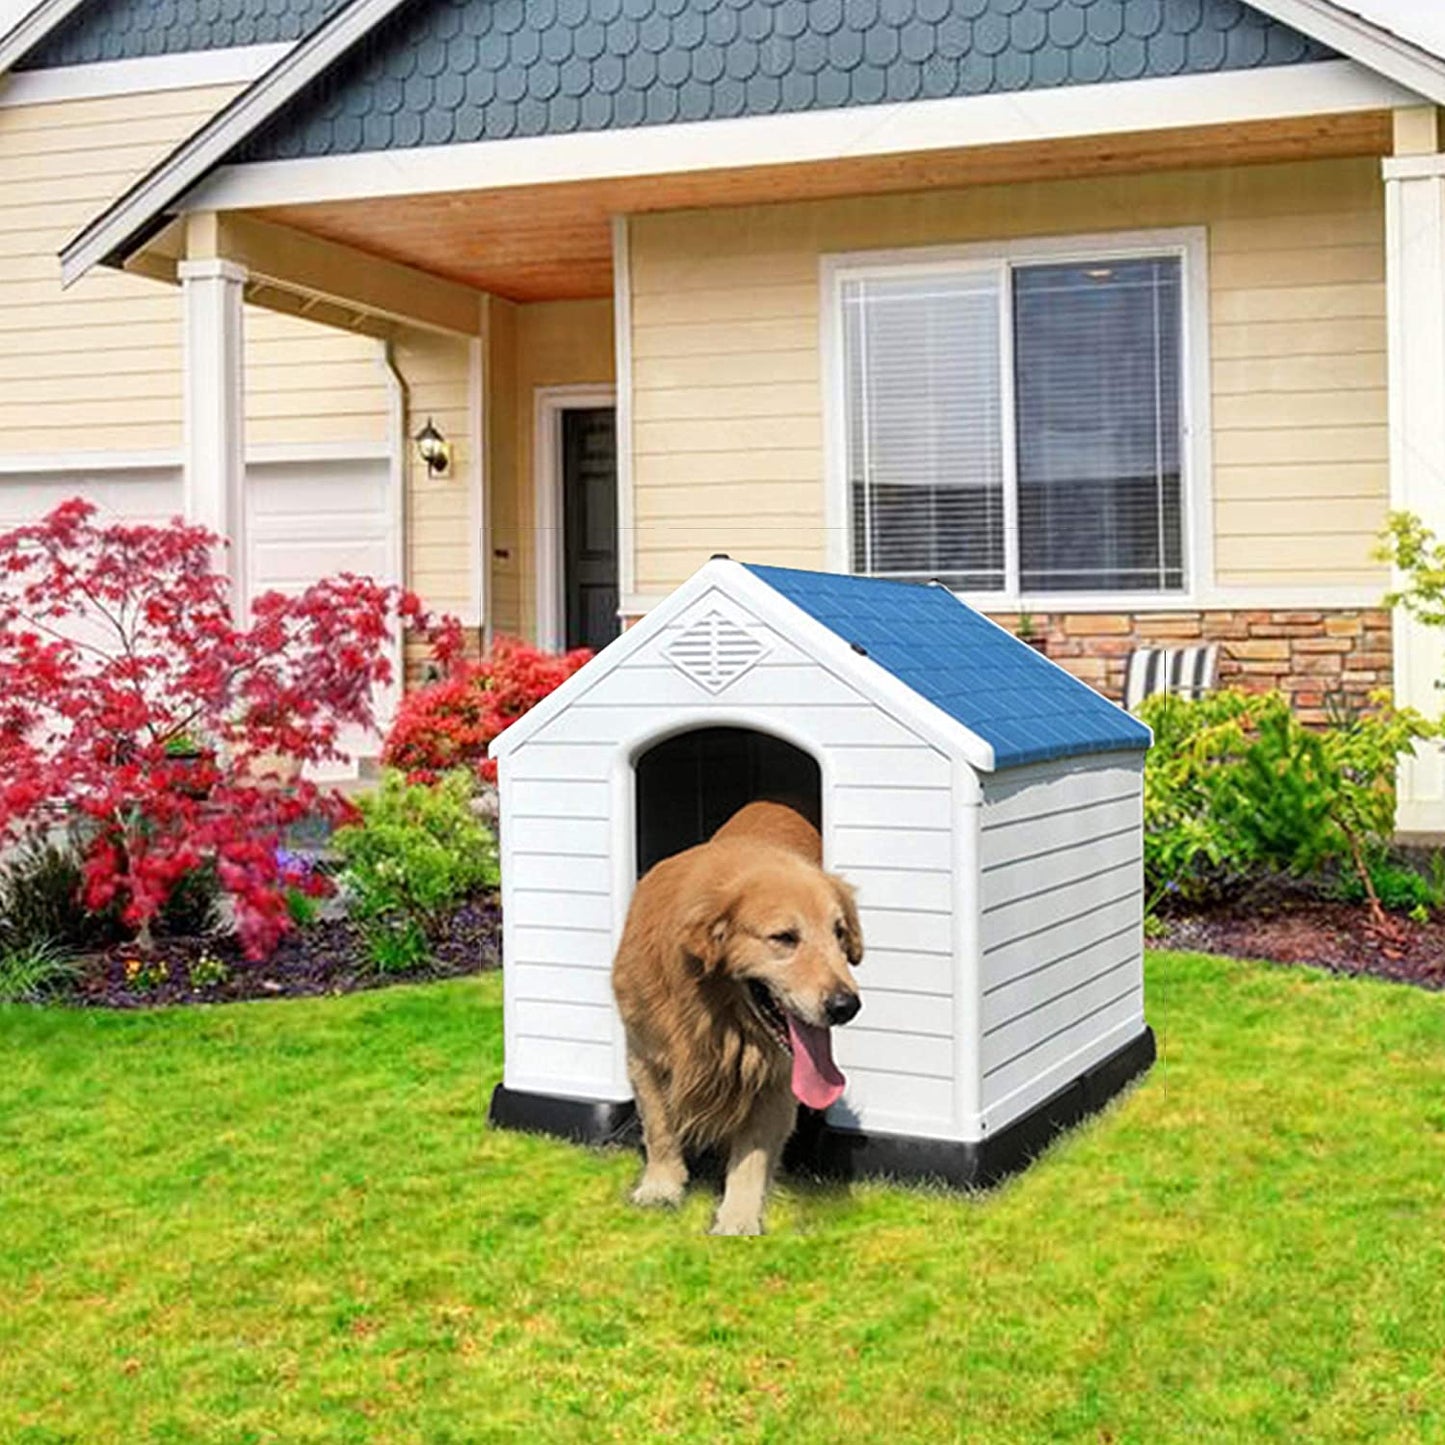 EXTFIT Plastic Dog House - Water Resistant Dog Kennel for Small to Medium Sized Dogs All Weather Indoor Outdoor Doghouse Puppy Shelter